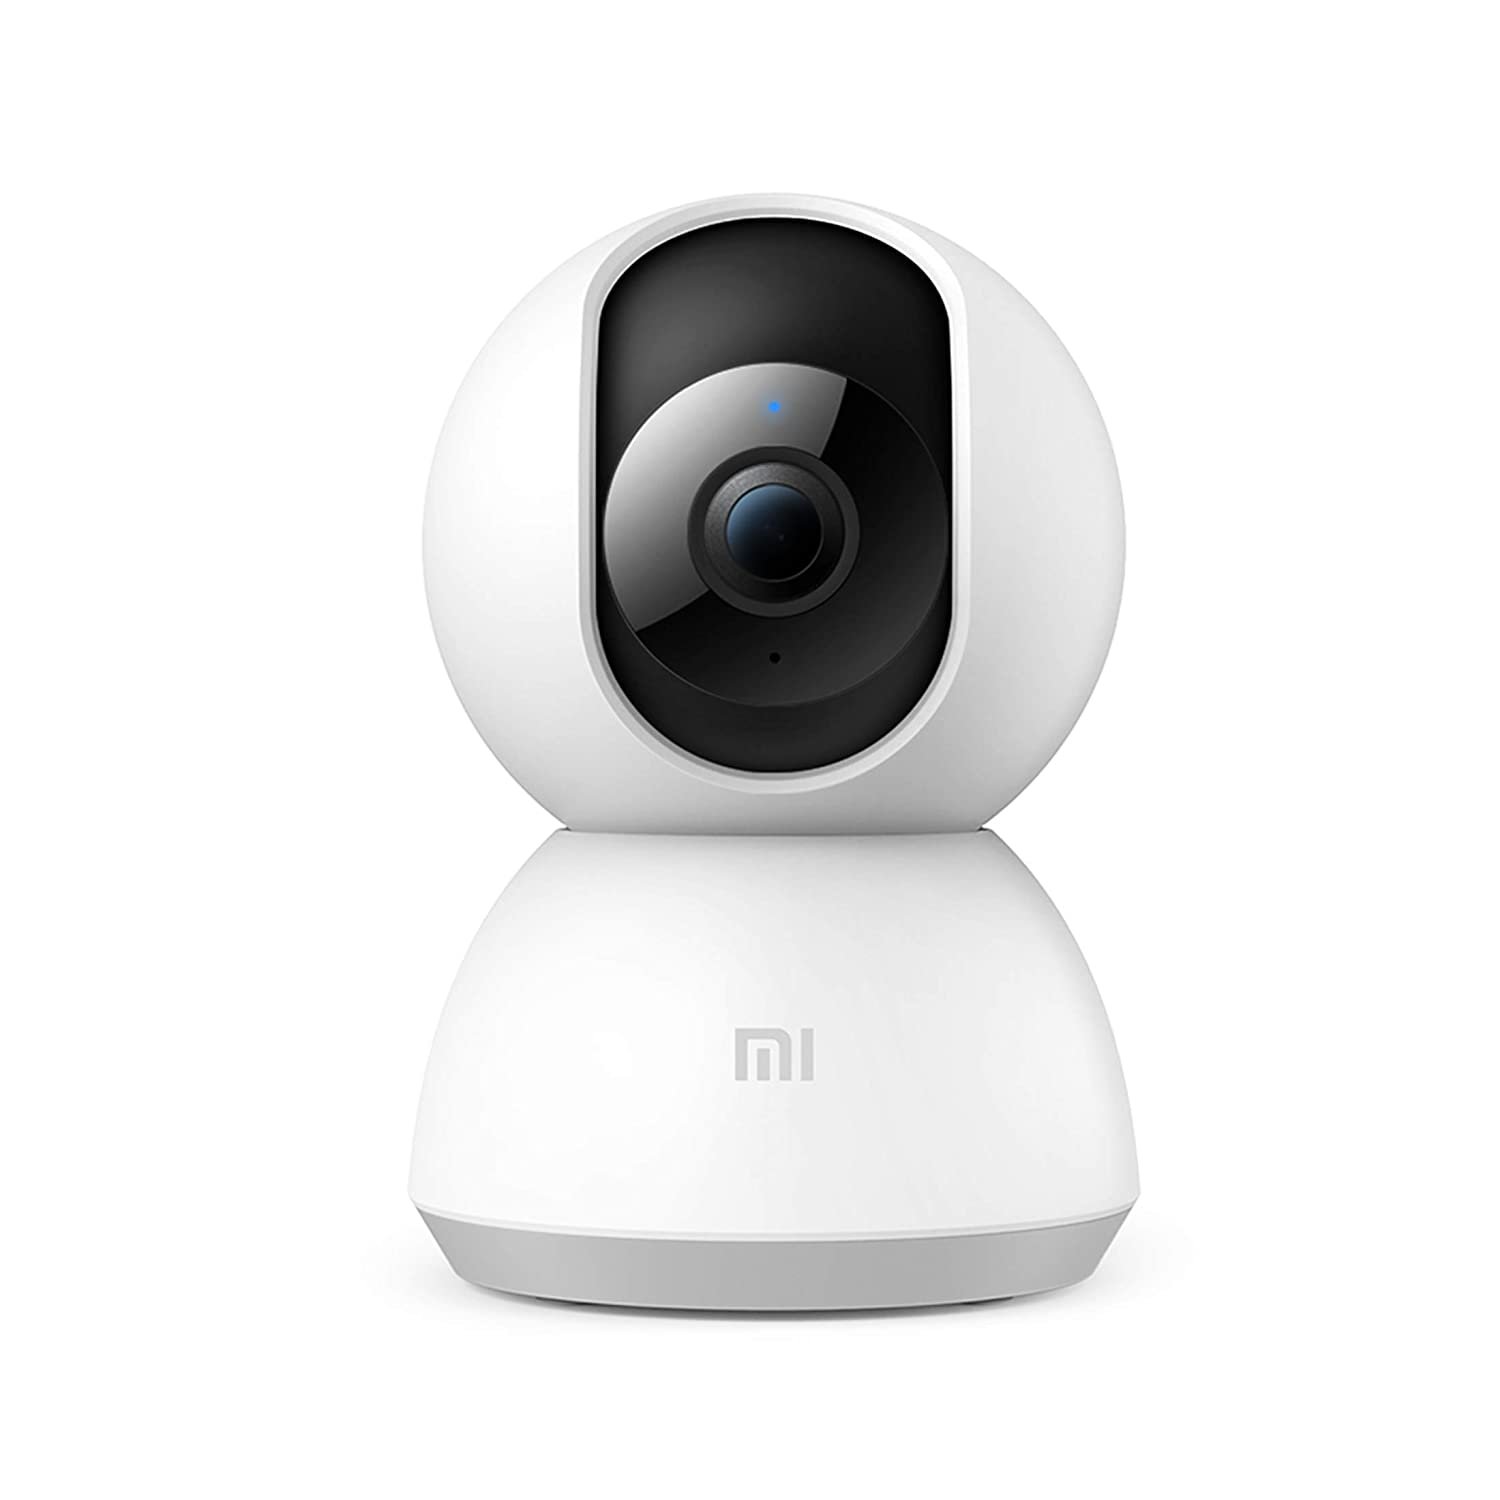 Xiaomi Mi 360 Security Camera 2K Pro And Smart Clock Launched - ANN